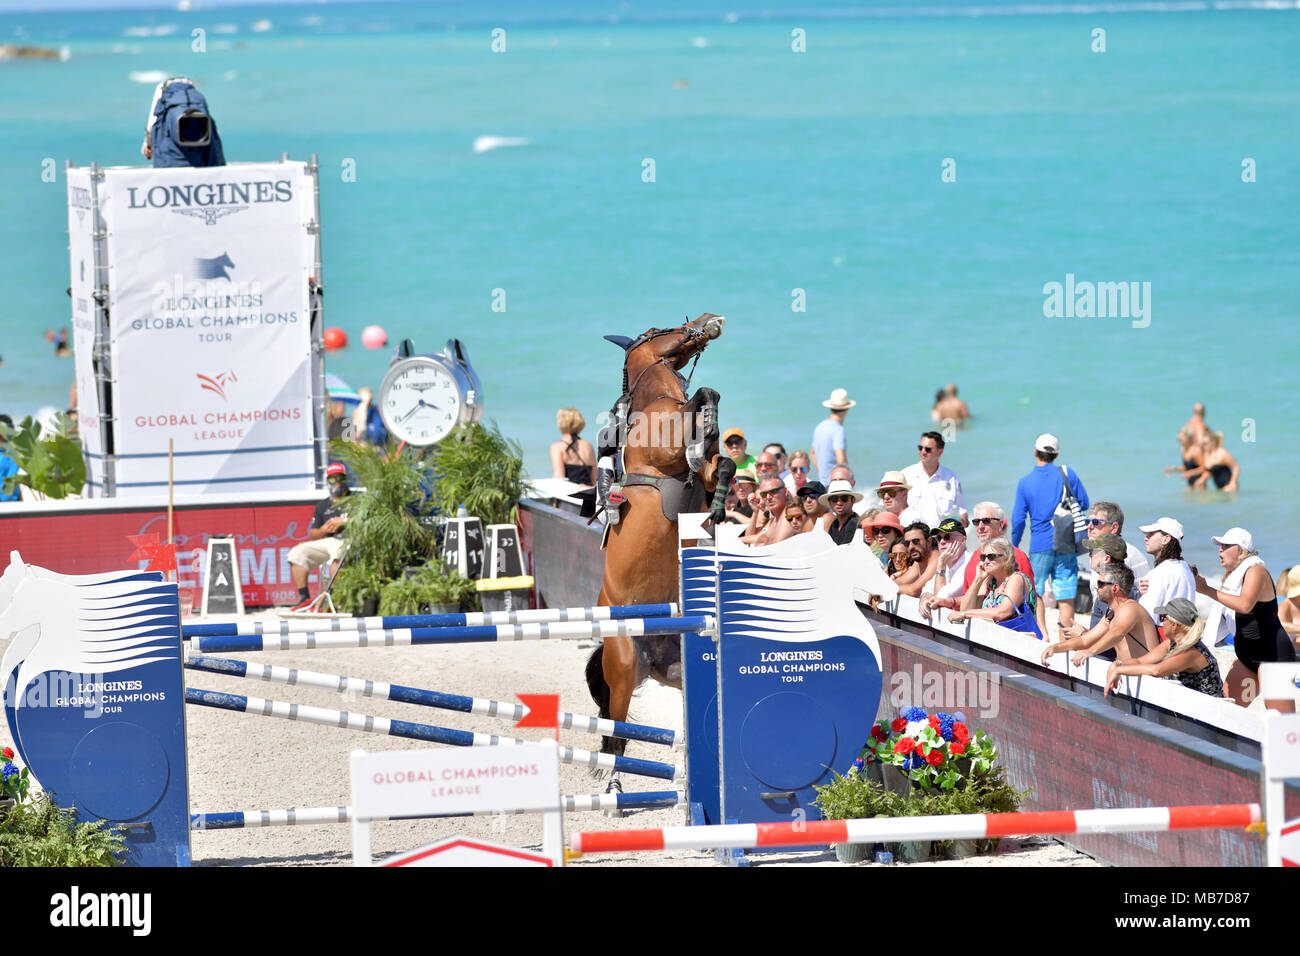 MIAMI BEACH, FL - APRIL 06: World Class Riders from around the globe attend  the Longines Global